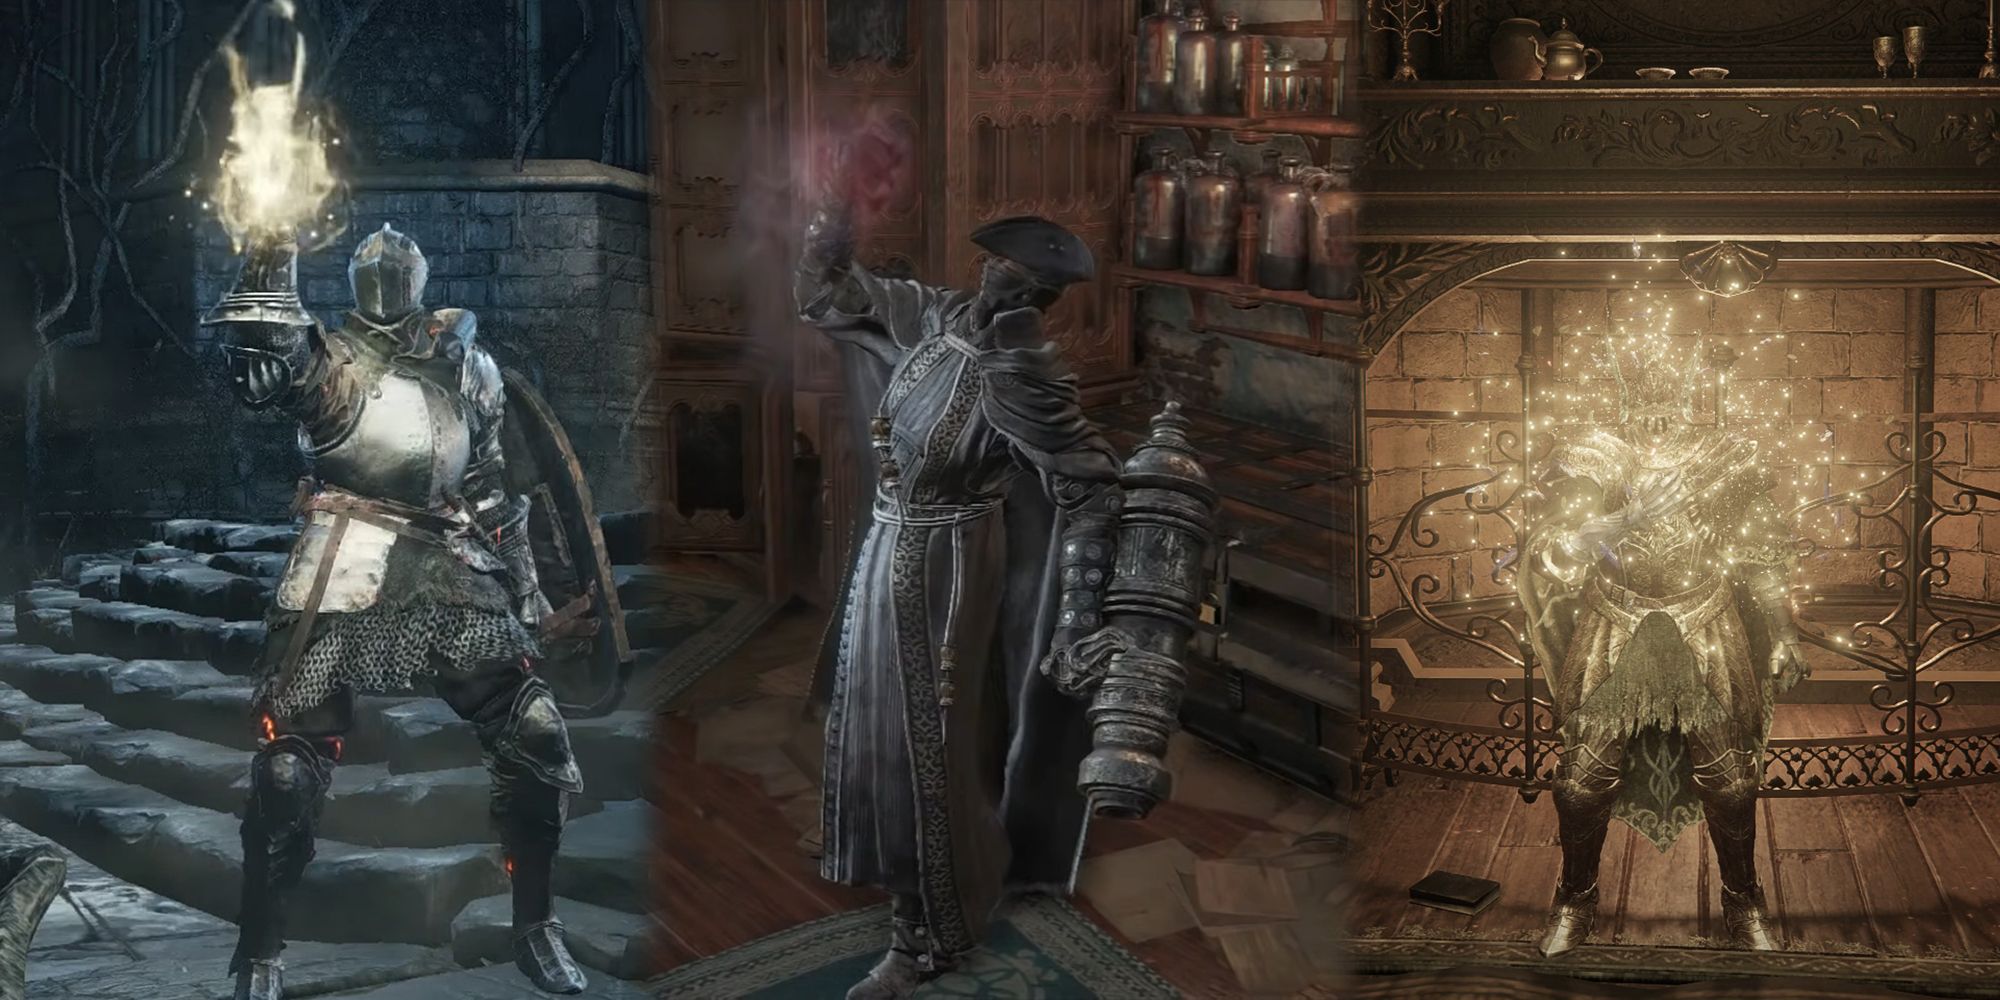 Elden Ring - Examples Of Popping Currency Items In Dark Souls 3, Bloodborne, and Elden Ring